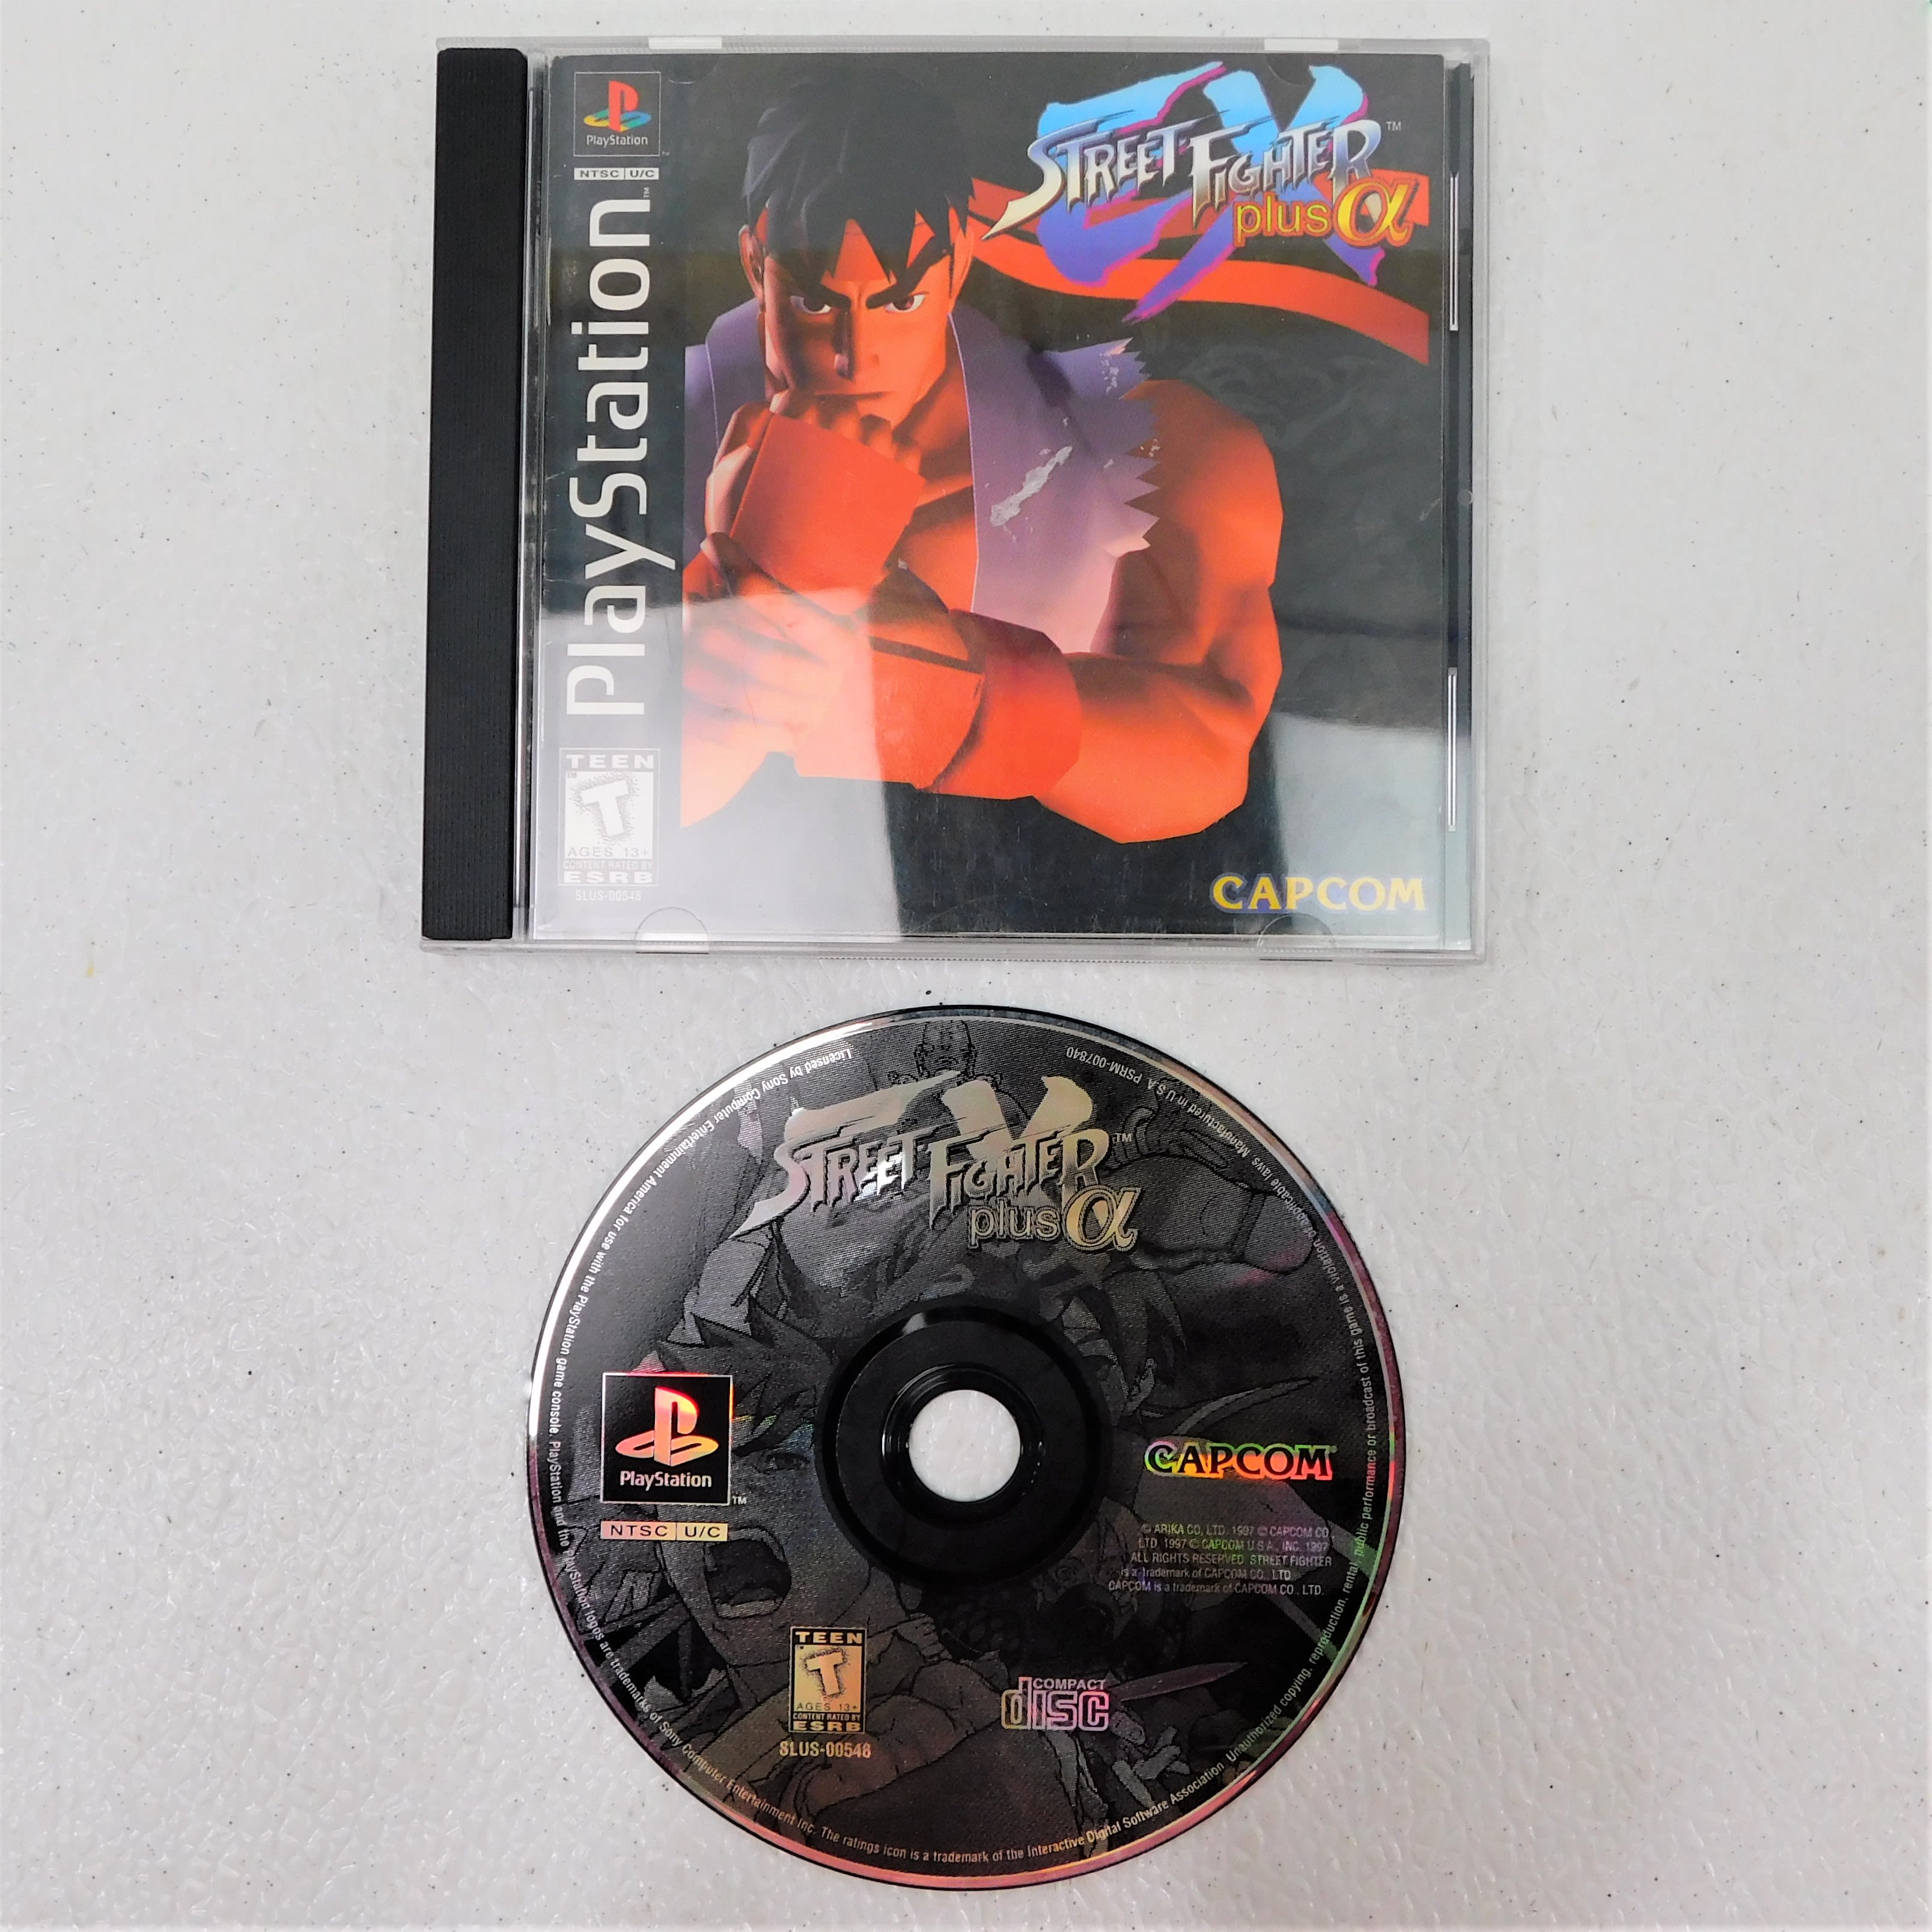 Street Fighter Collection (Sony PlayStation 1, 1997) for sale online